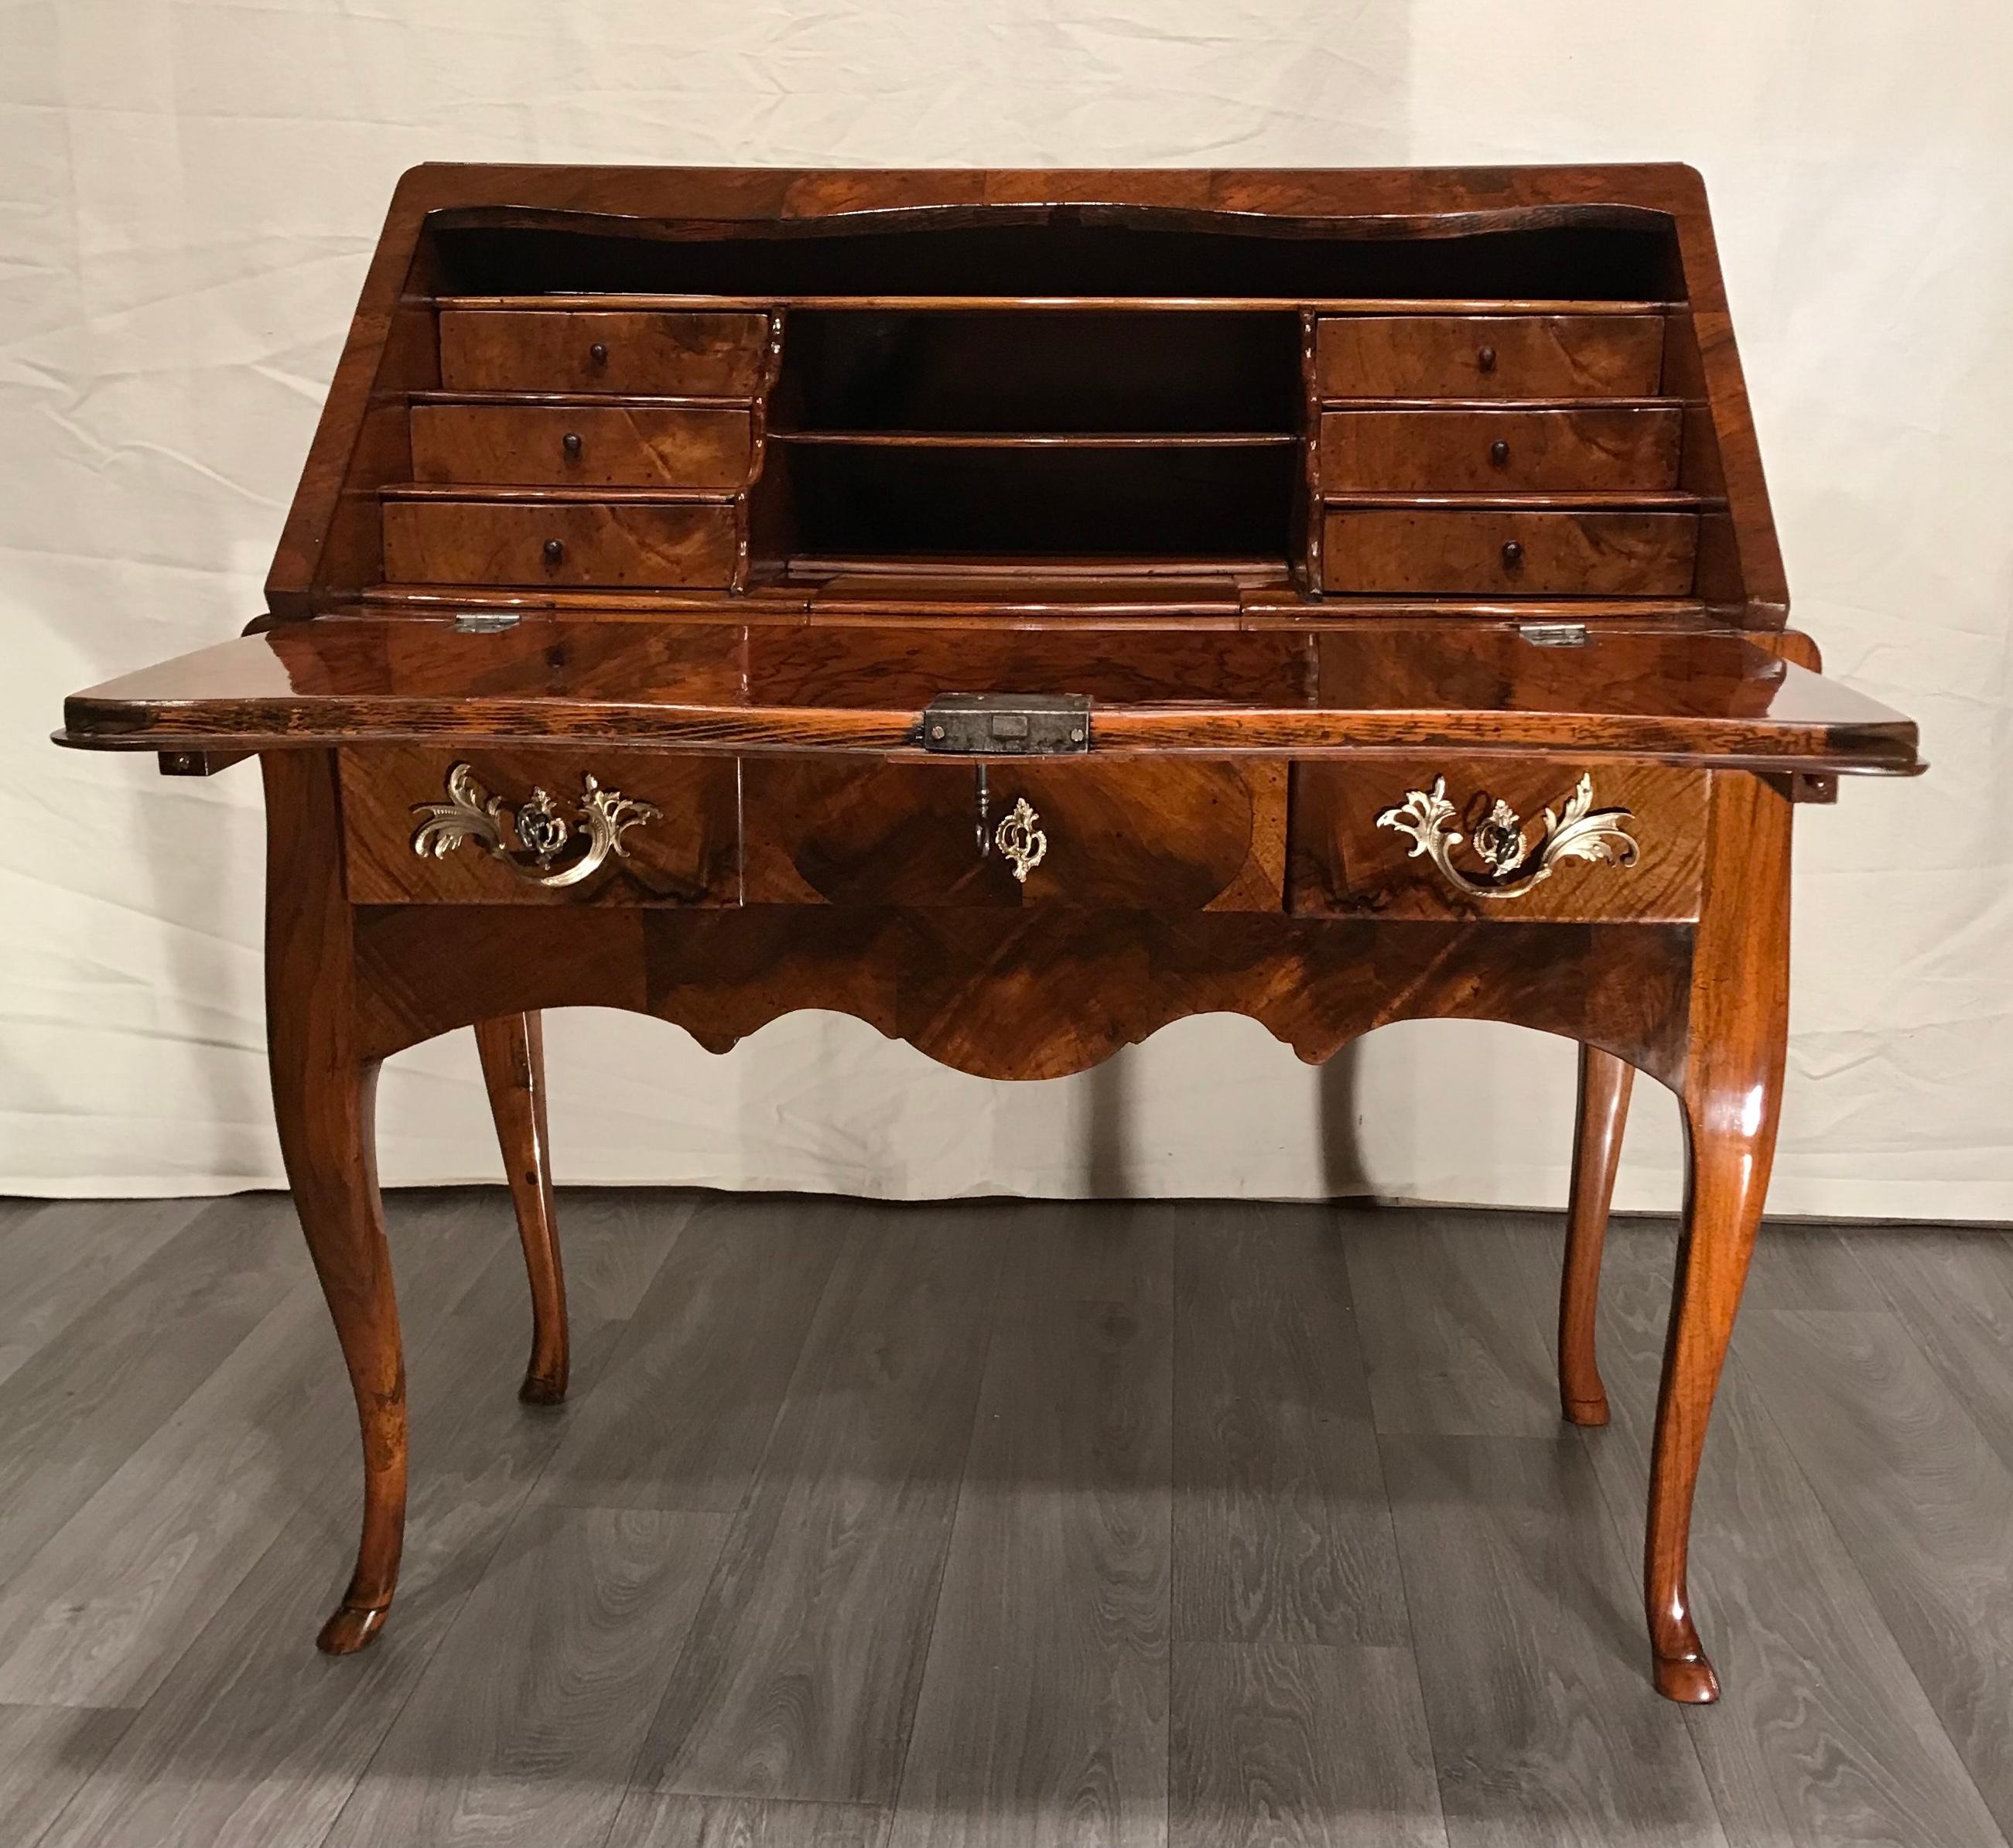 Baroque secretary desk, Switzerland, 1750.
This gorgeous baroque secretary desk stands out for its very pretty walnut veneer. The writing flap opens to an elegant interior with various small drawers and open and secret compartments. The writing